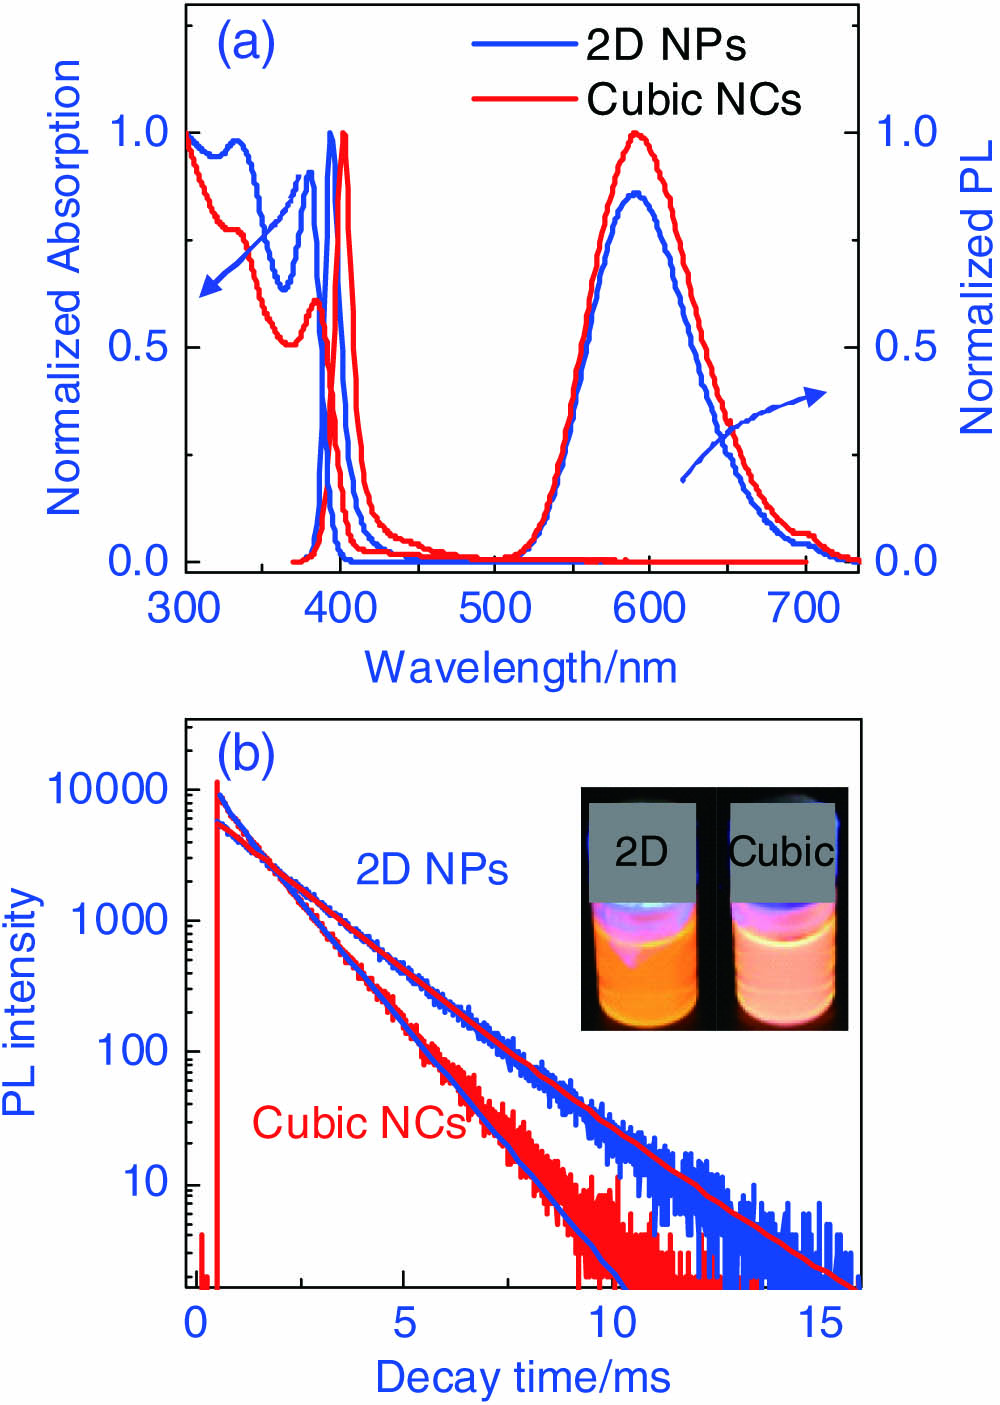 (a) UV-vis absorption and PL spectra of the 2D NPs and the cubic NCs. (b) Time-dependent PL intensity of Mn2+ at 592 nm measured from the 2D NPs and the cubic NCs. The insets show their colloidal solutions under UV illumination (λ=365 nm).